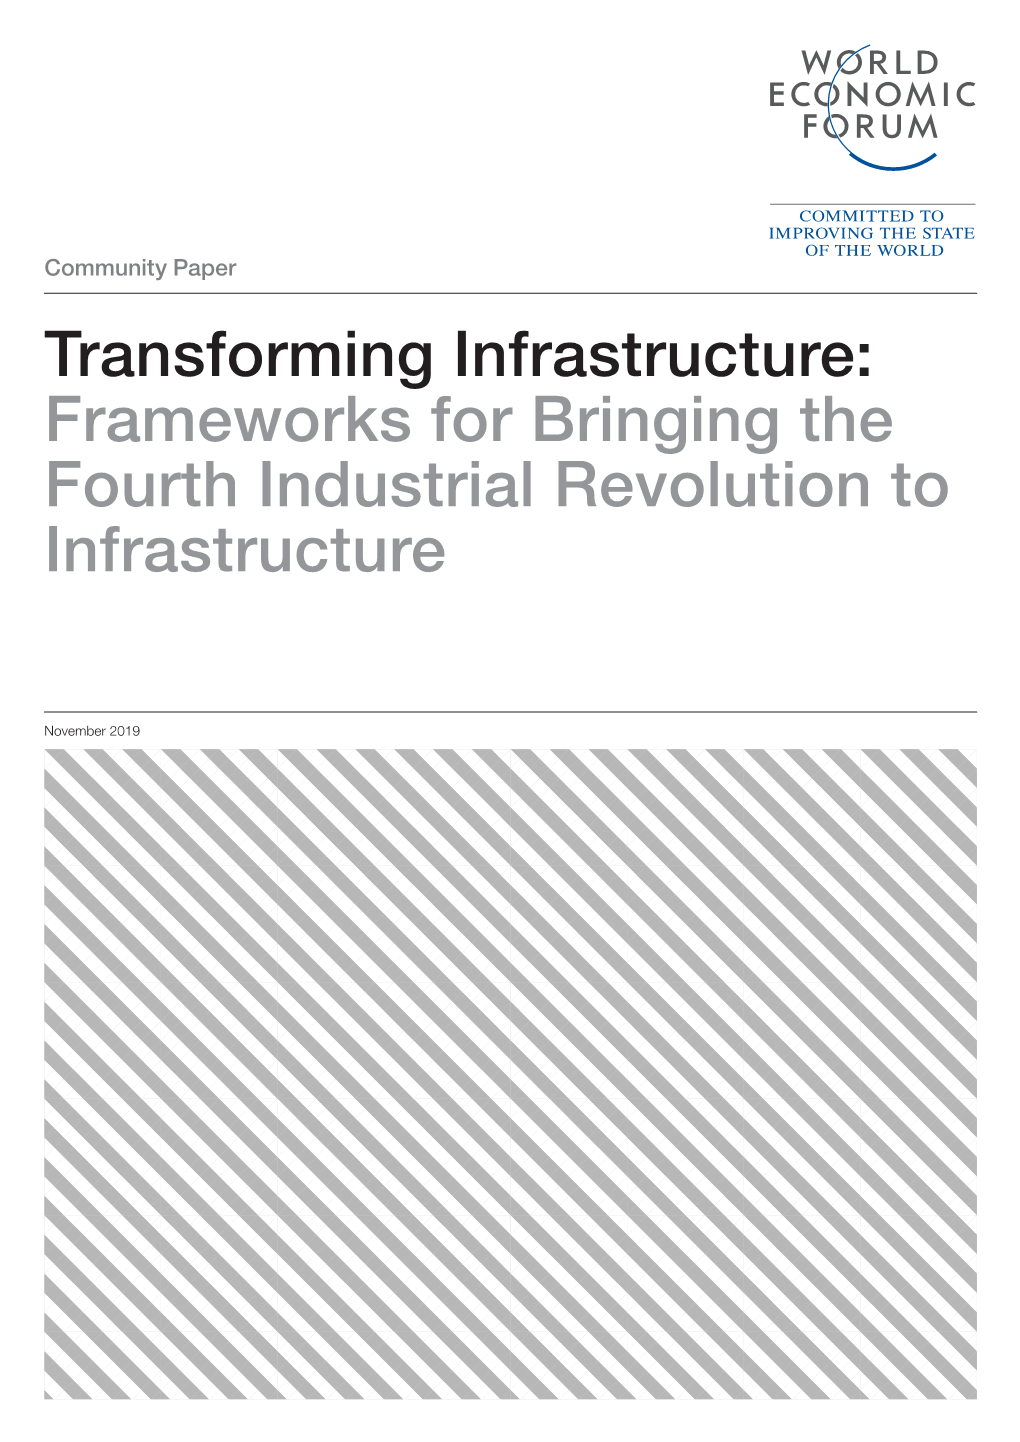 Transforming Infrastructure: Frameworks for Bringing the Fourth Industrial Revolution to Infrastructure